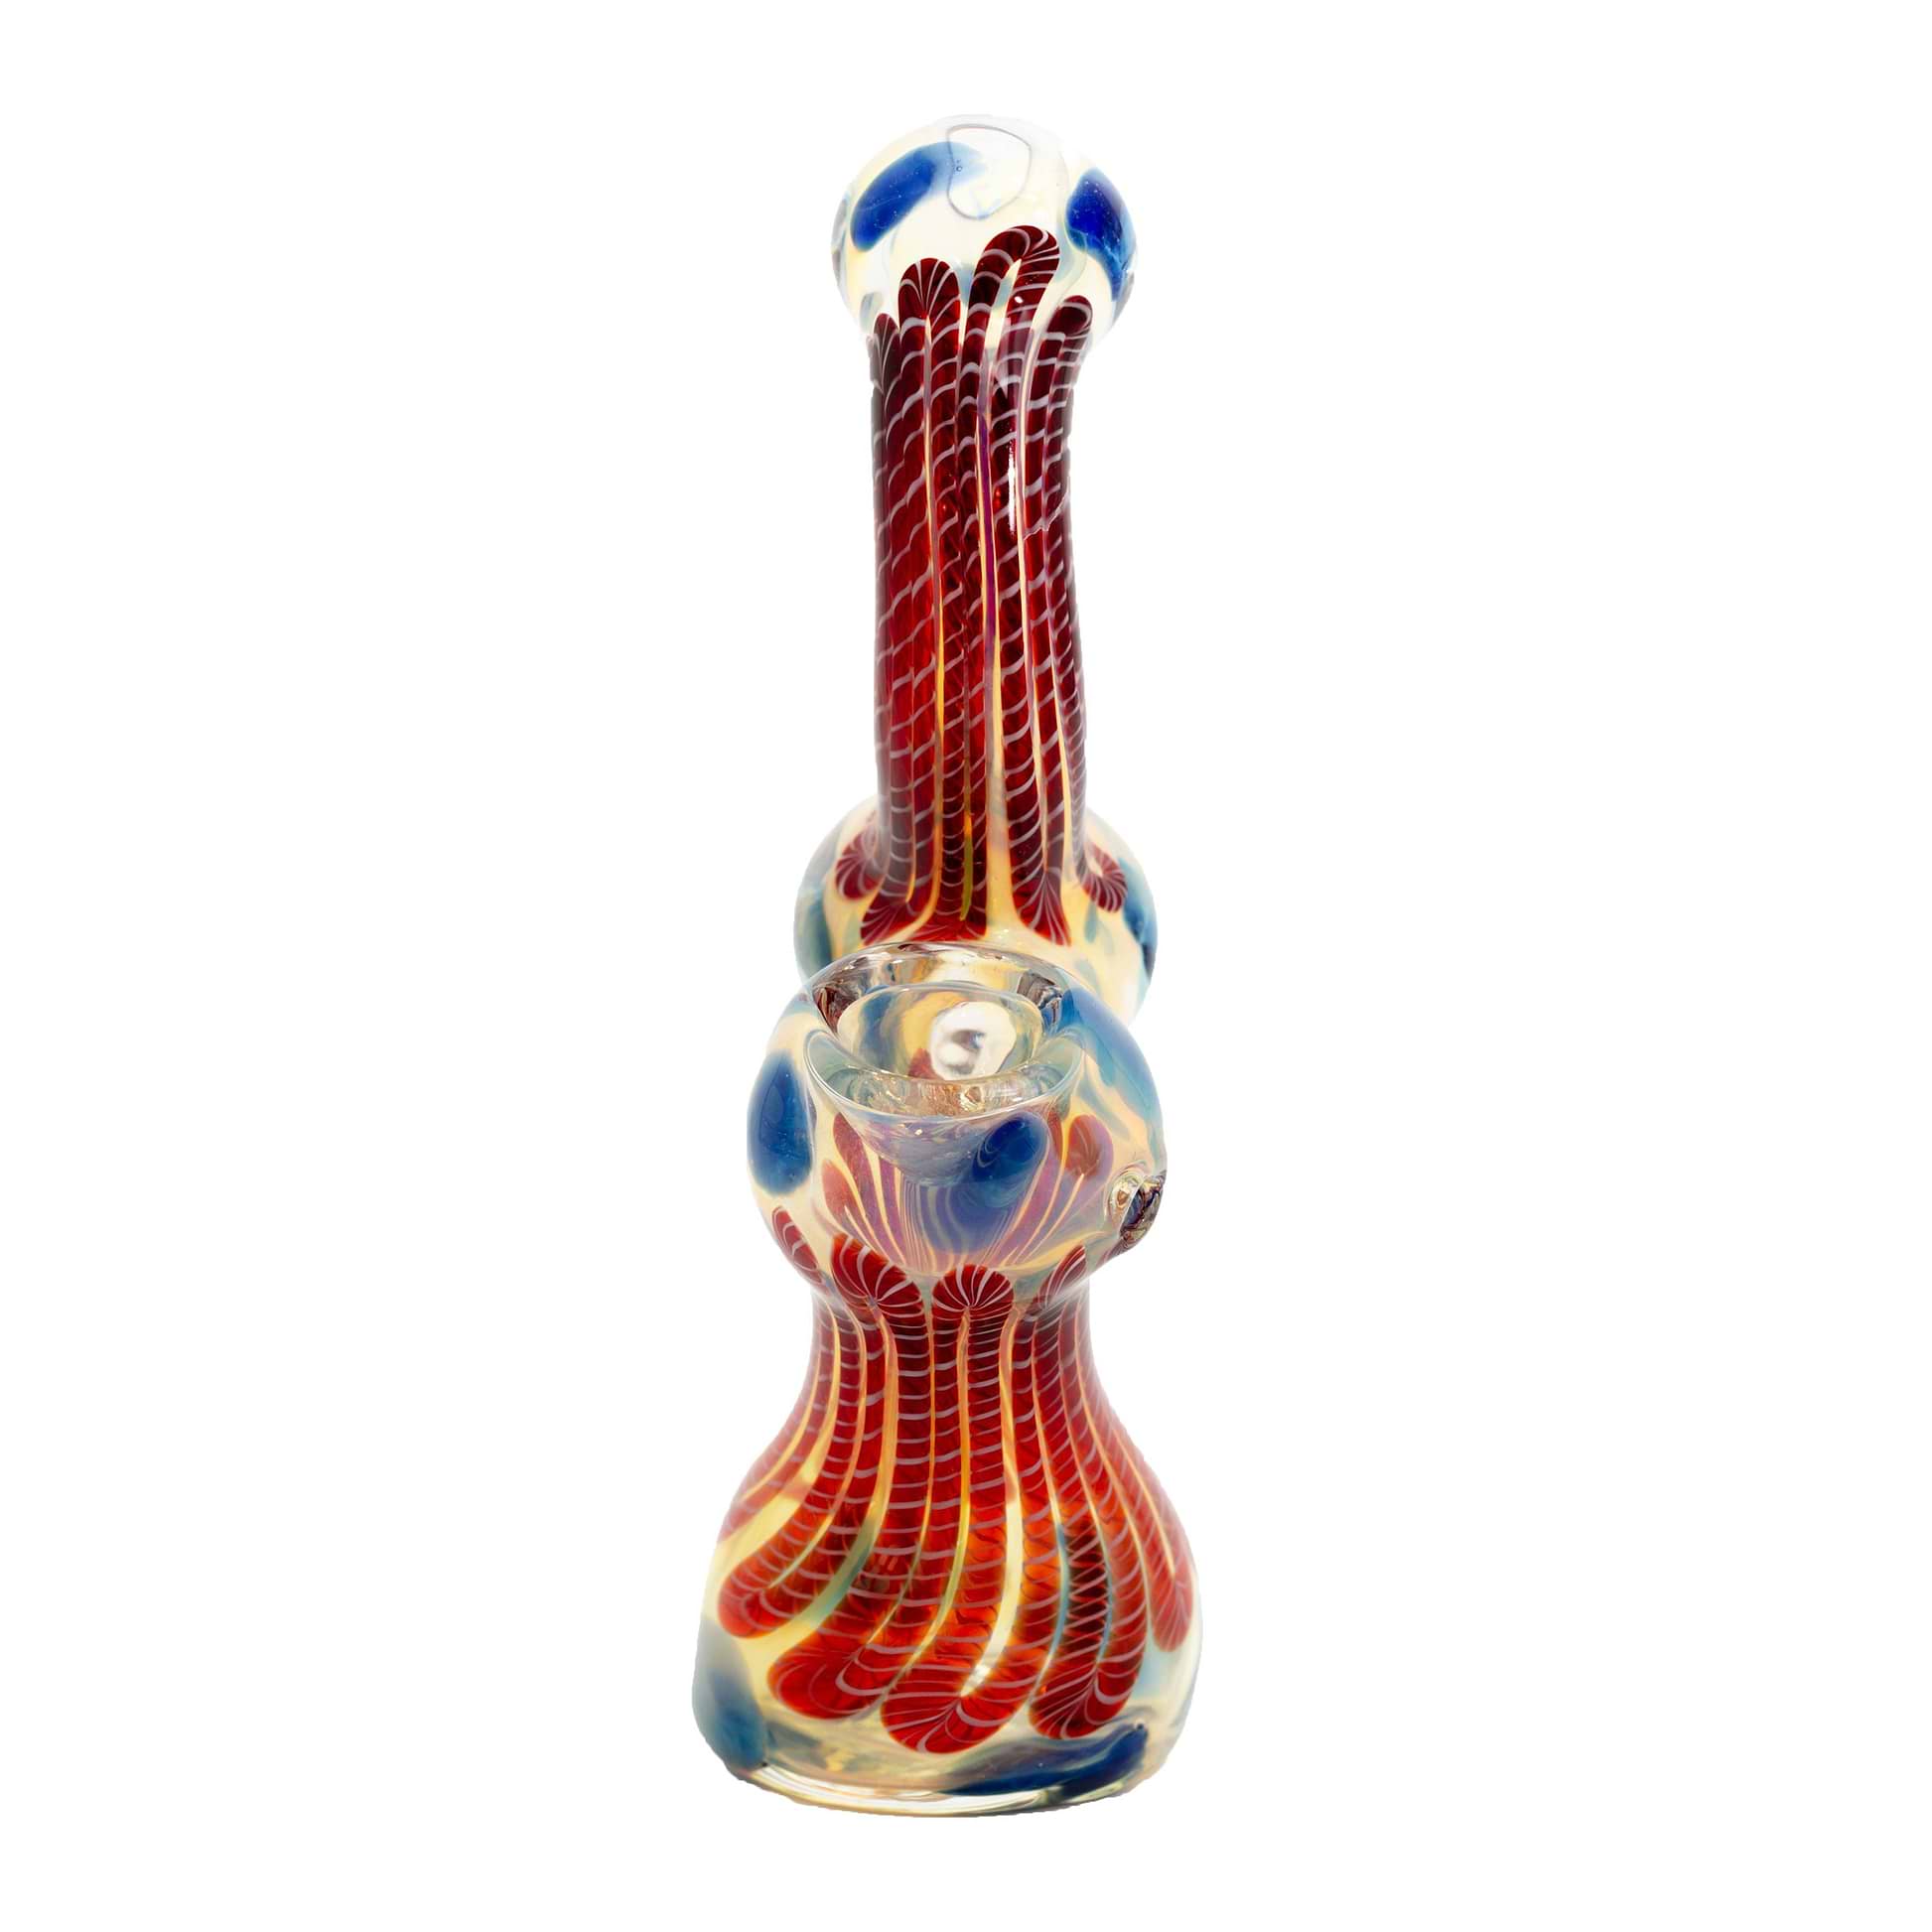 7-inch bubbler glass smoking device unique shape and Poseidon-inspired style swirling colors